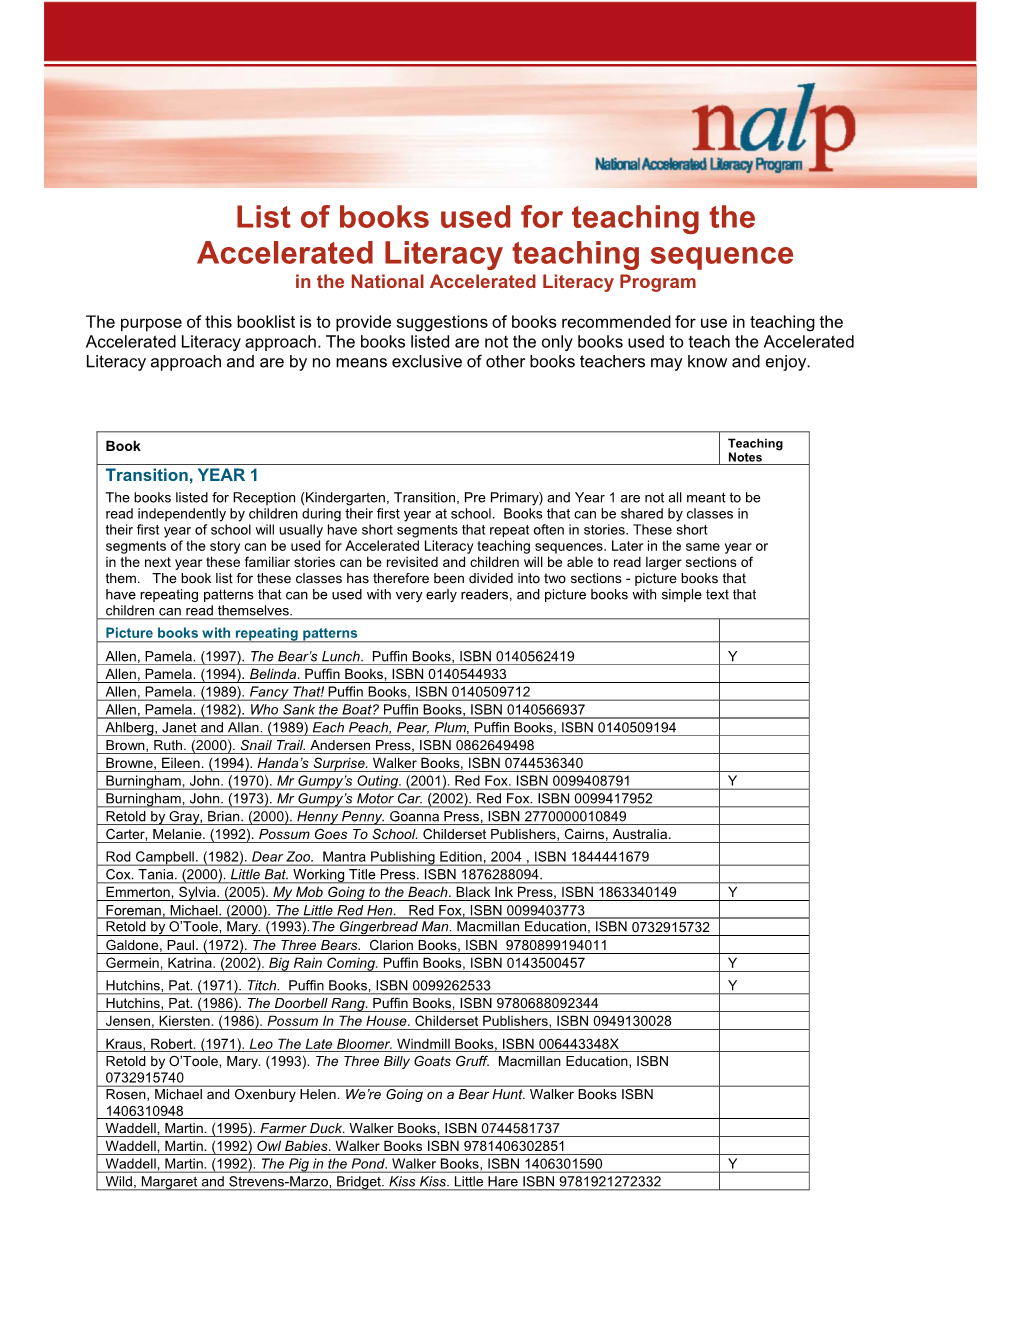 List of Books Used for Teaching the Accelerated Literacy Teaching Sequence in the National Accelerated Literacy Program